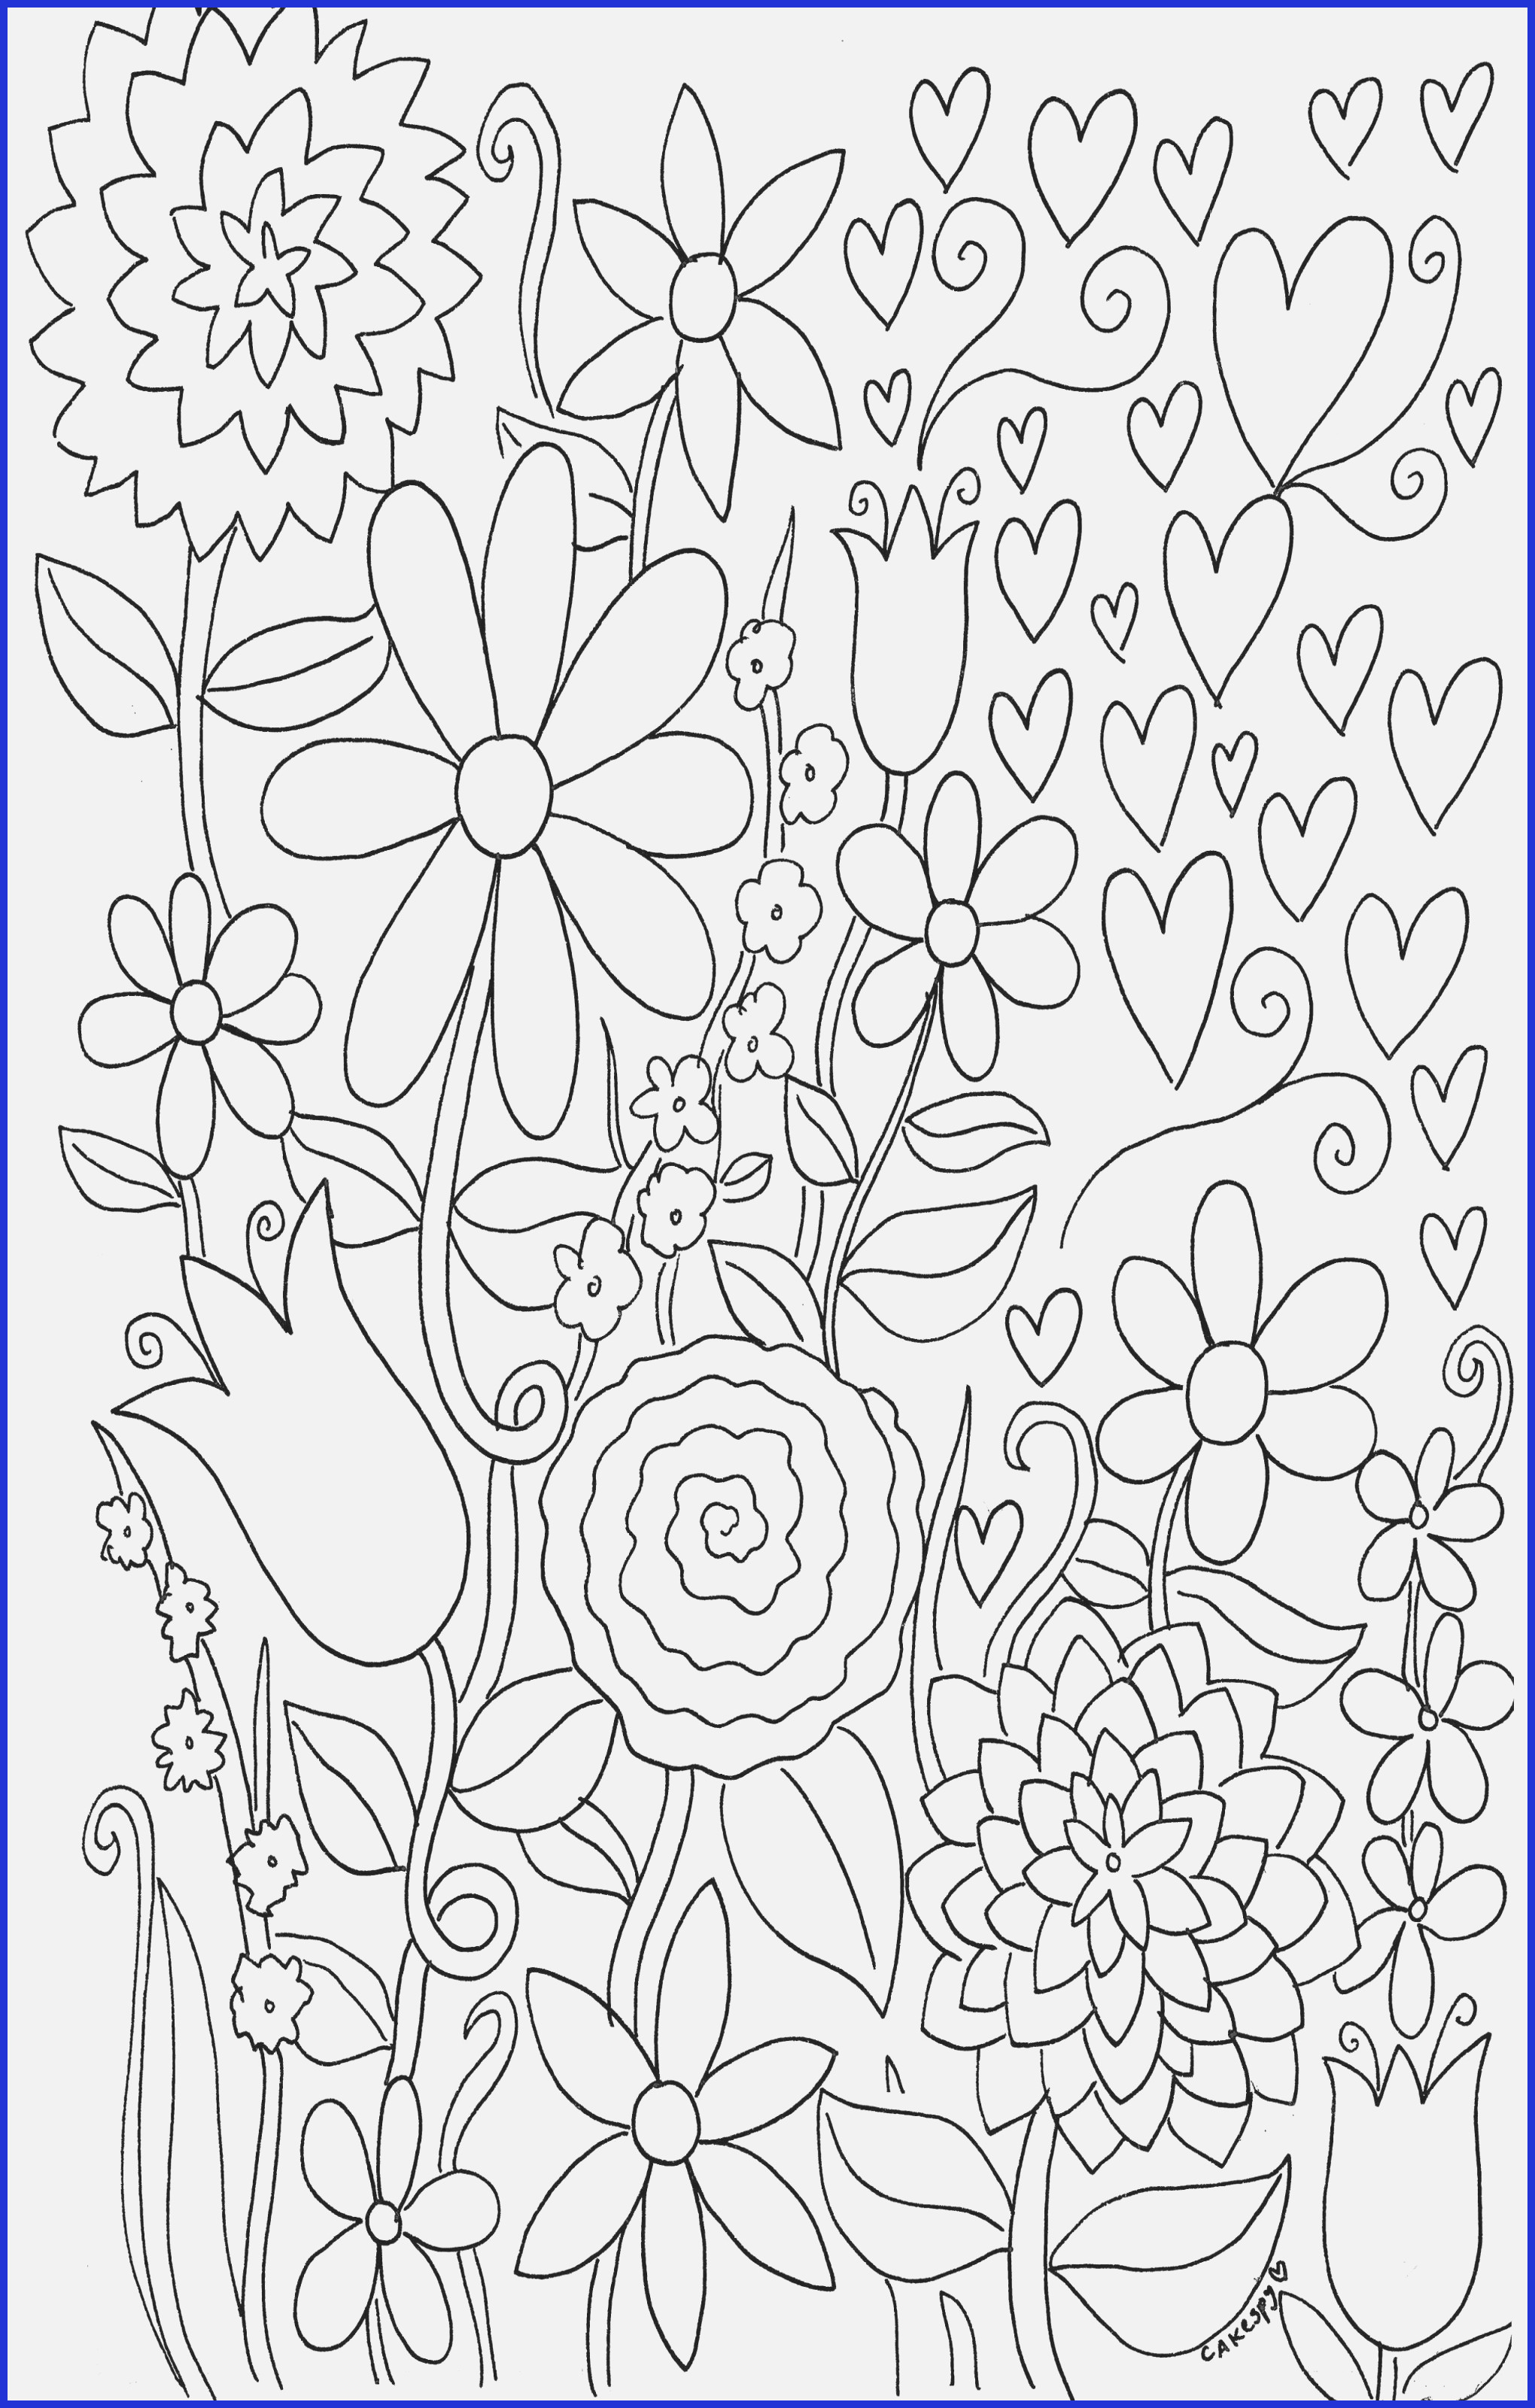 17 Recommended Yellow Flowers In Vase Painting 2024 free download yellow flowers in vase painting of 12 cute free printable paint by numbers for adults www gsfl info regarding free download try a new technique with craftsy s paint by numbers for adults